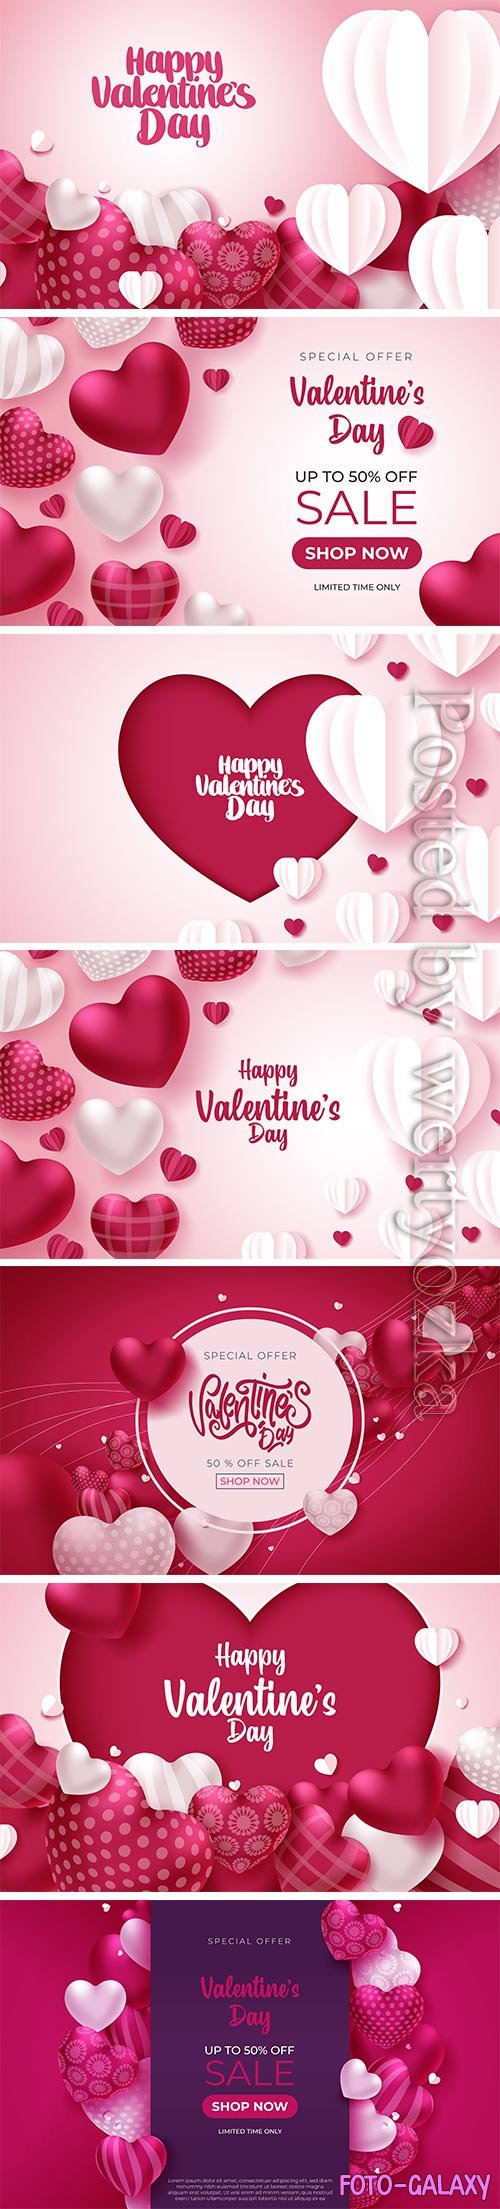 Valentine greeting card with hearts on pink